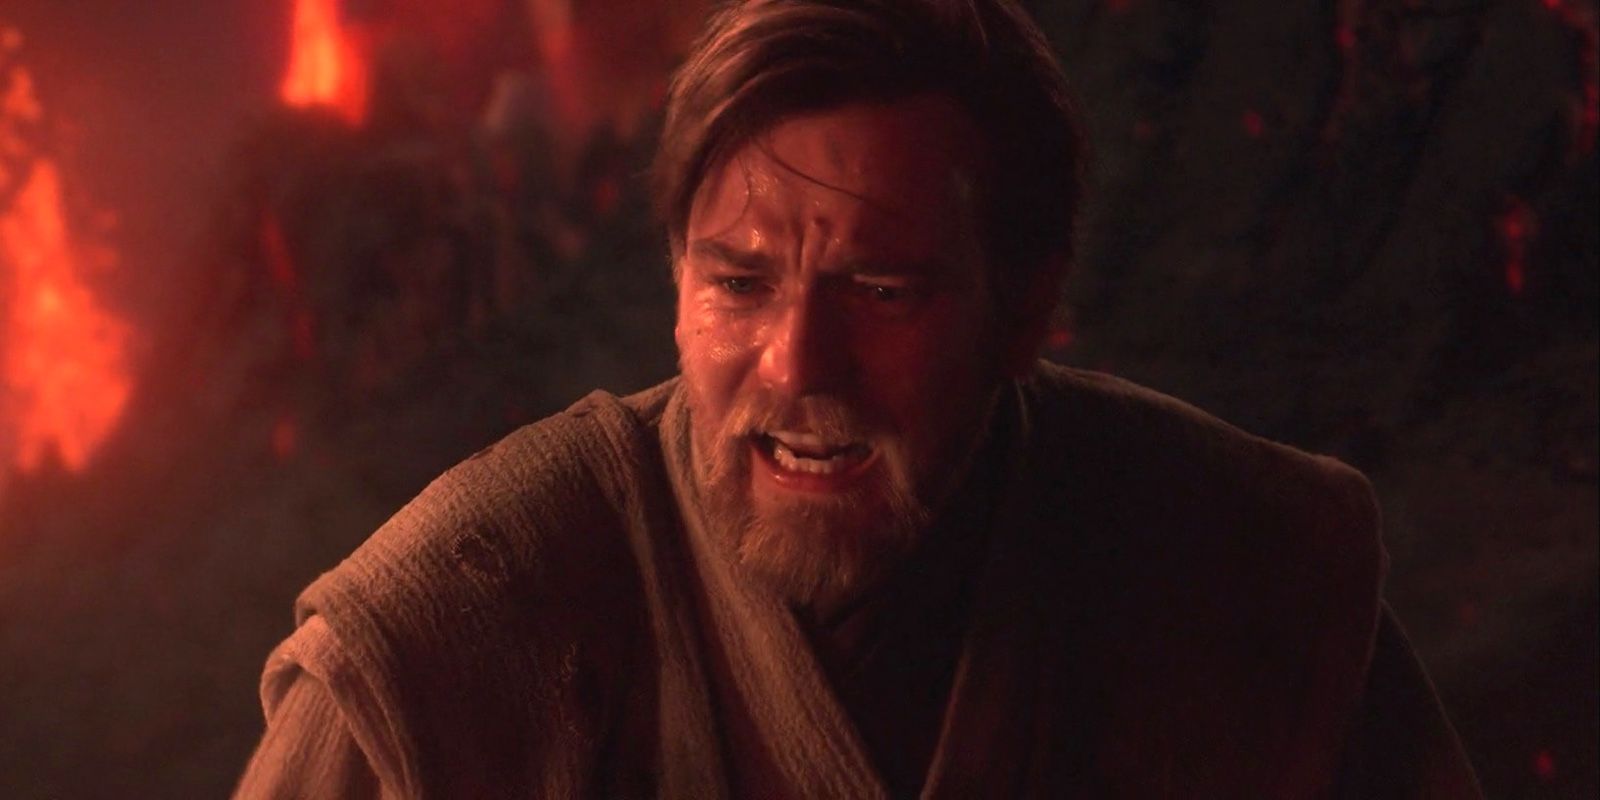 Obi-Wan speaks to Anakin, telling him he loved him, as he burns in the Mustafar lava in Revenge of the Sith